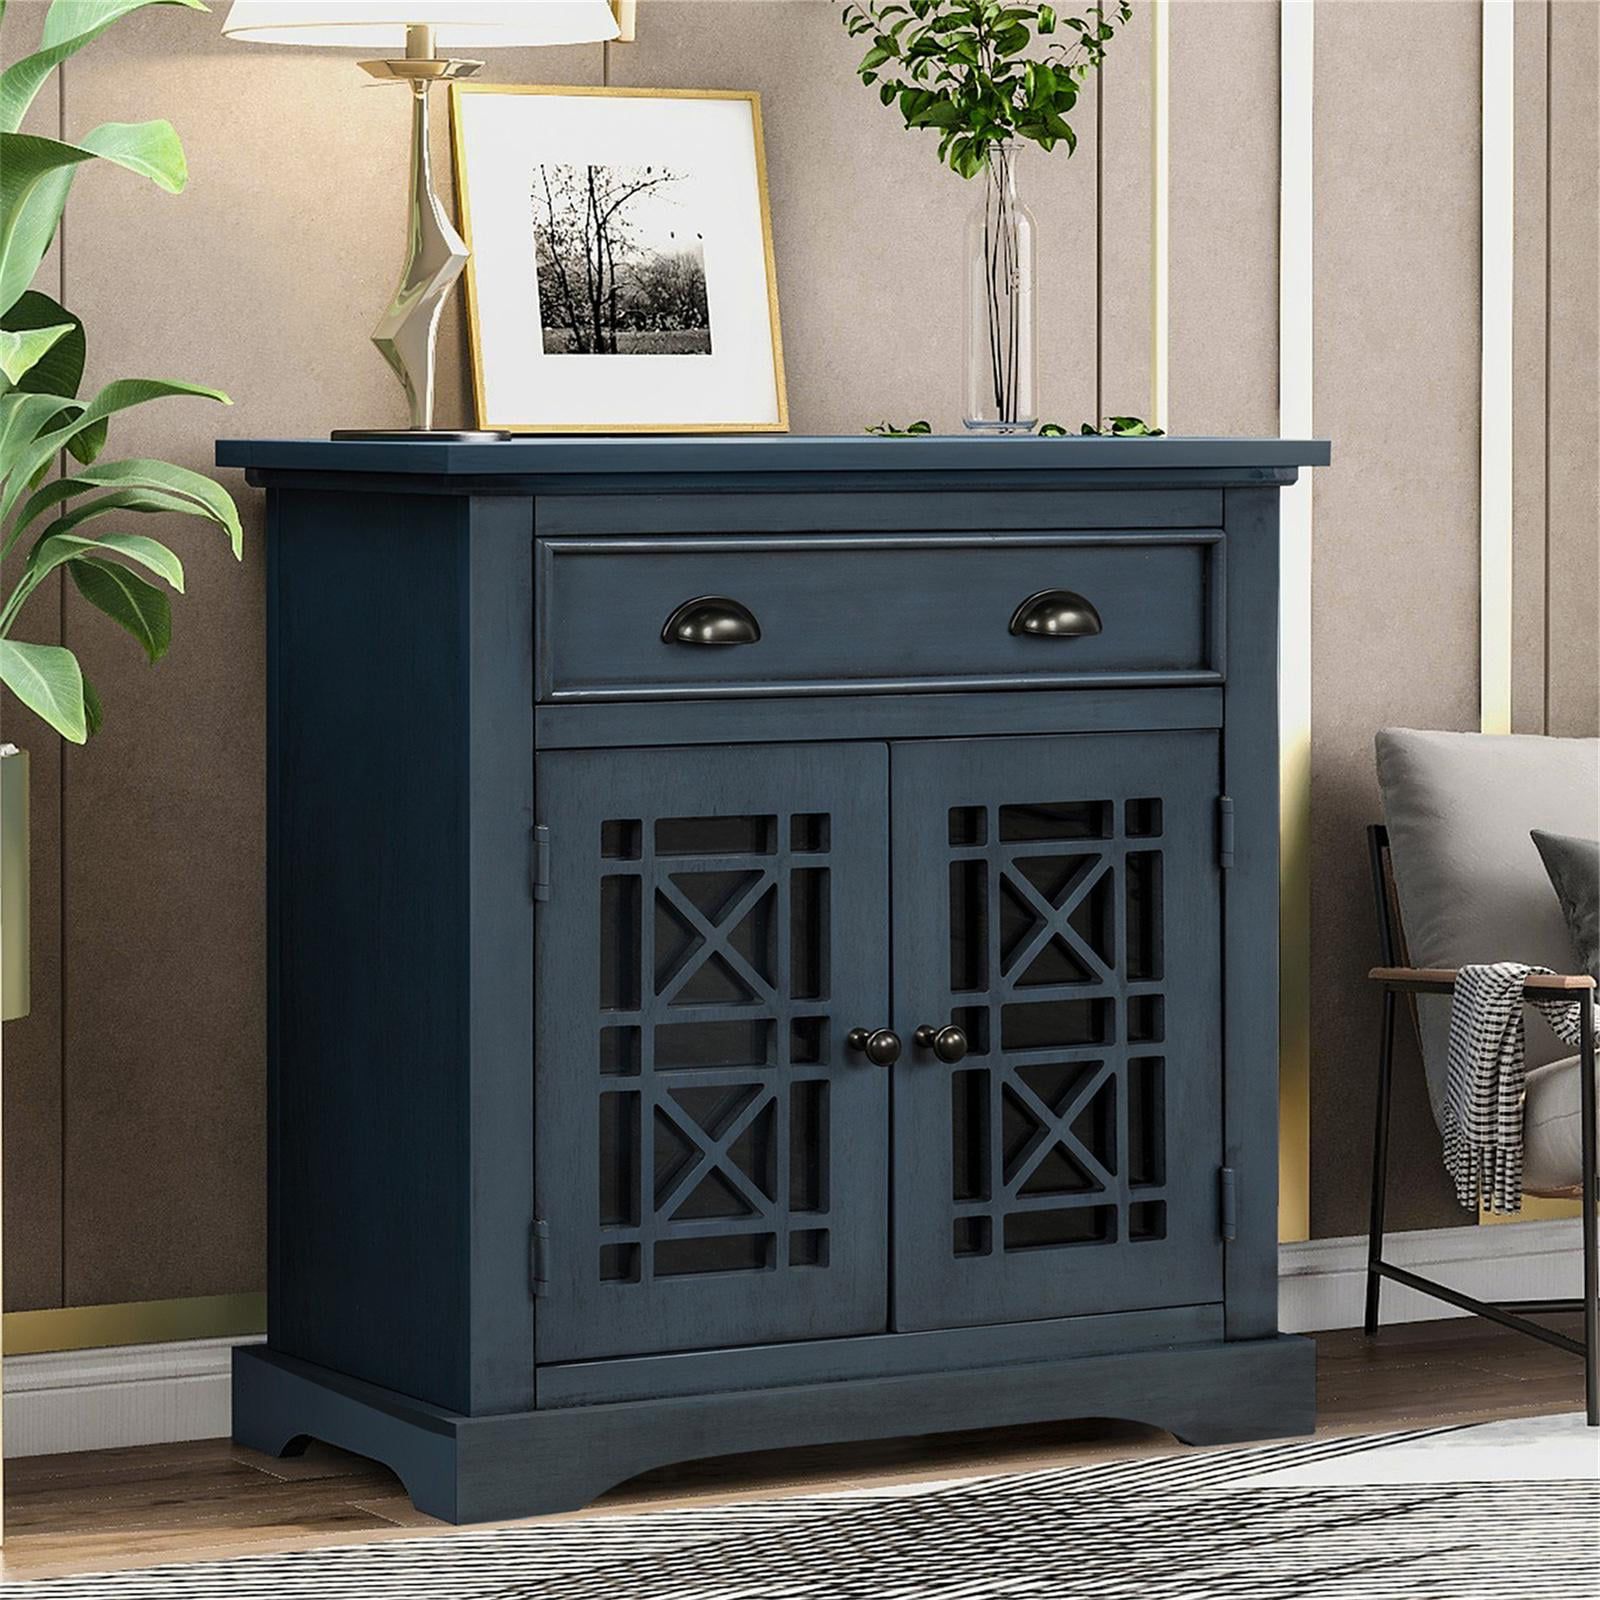 Rectangular Storage Cabinet, Console Sofa Table Wih Cabinet And Big In 2019 Freestanding Tables With Drawers (Photo 3 of 15)